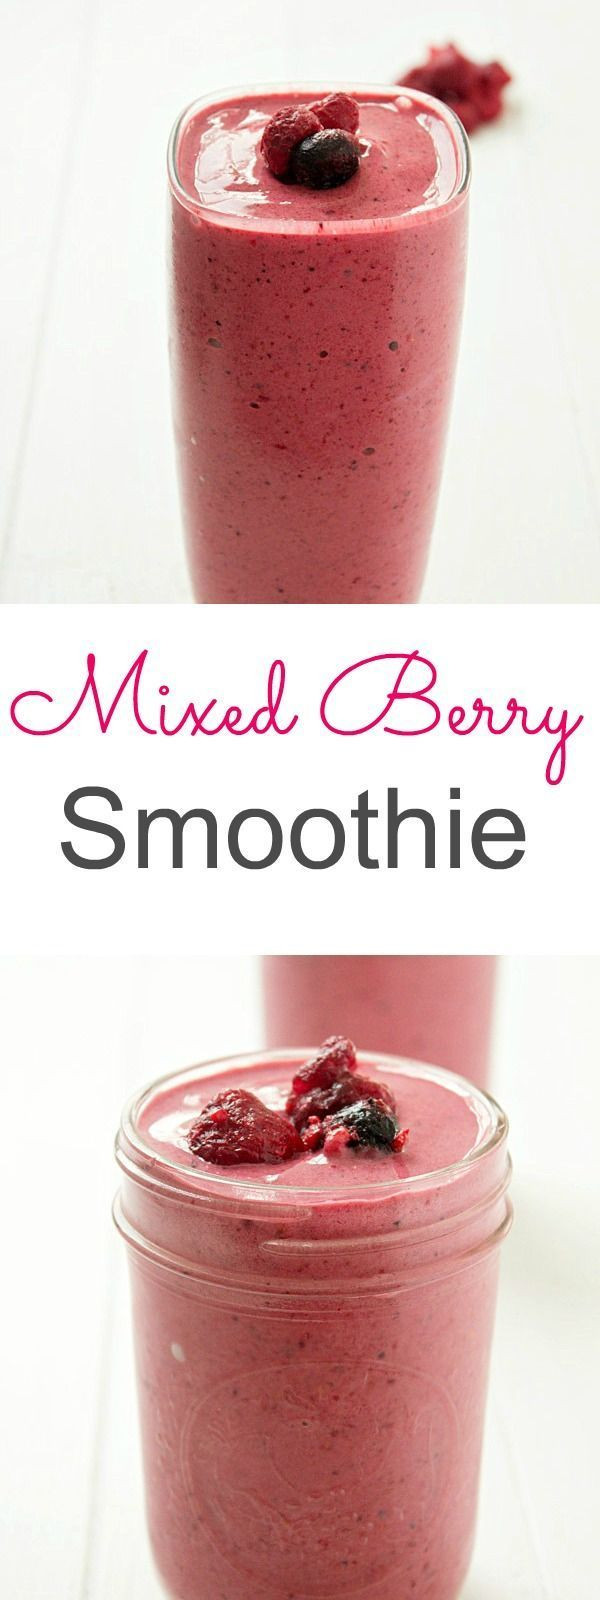 Simple Healthy Smoothies
 Best 25 Frozen berry smoothie ideas on Pinterest